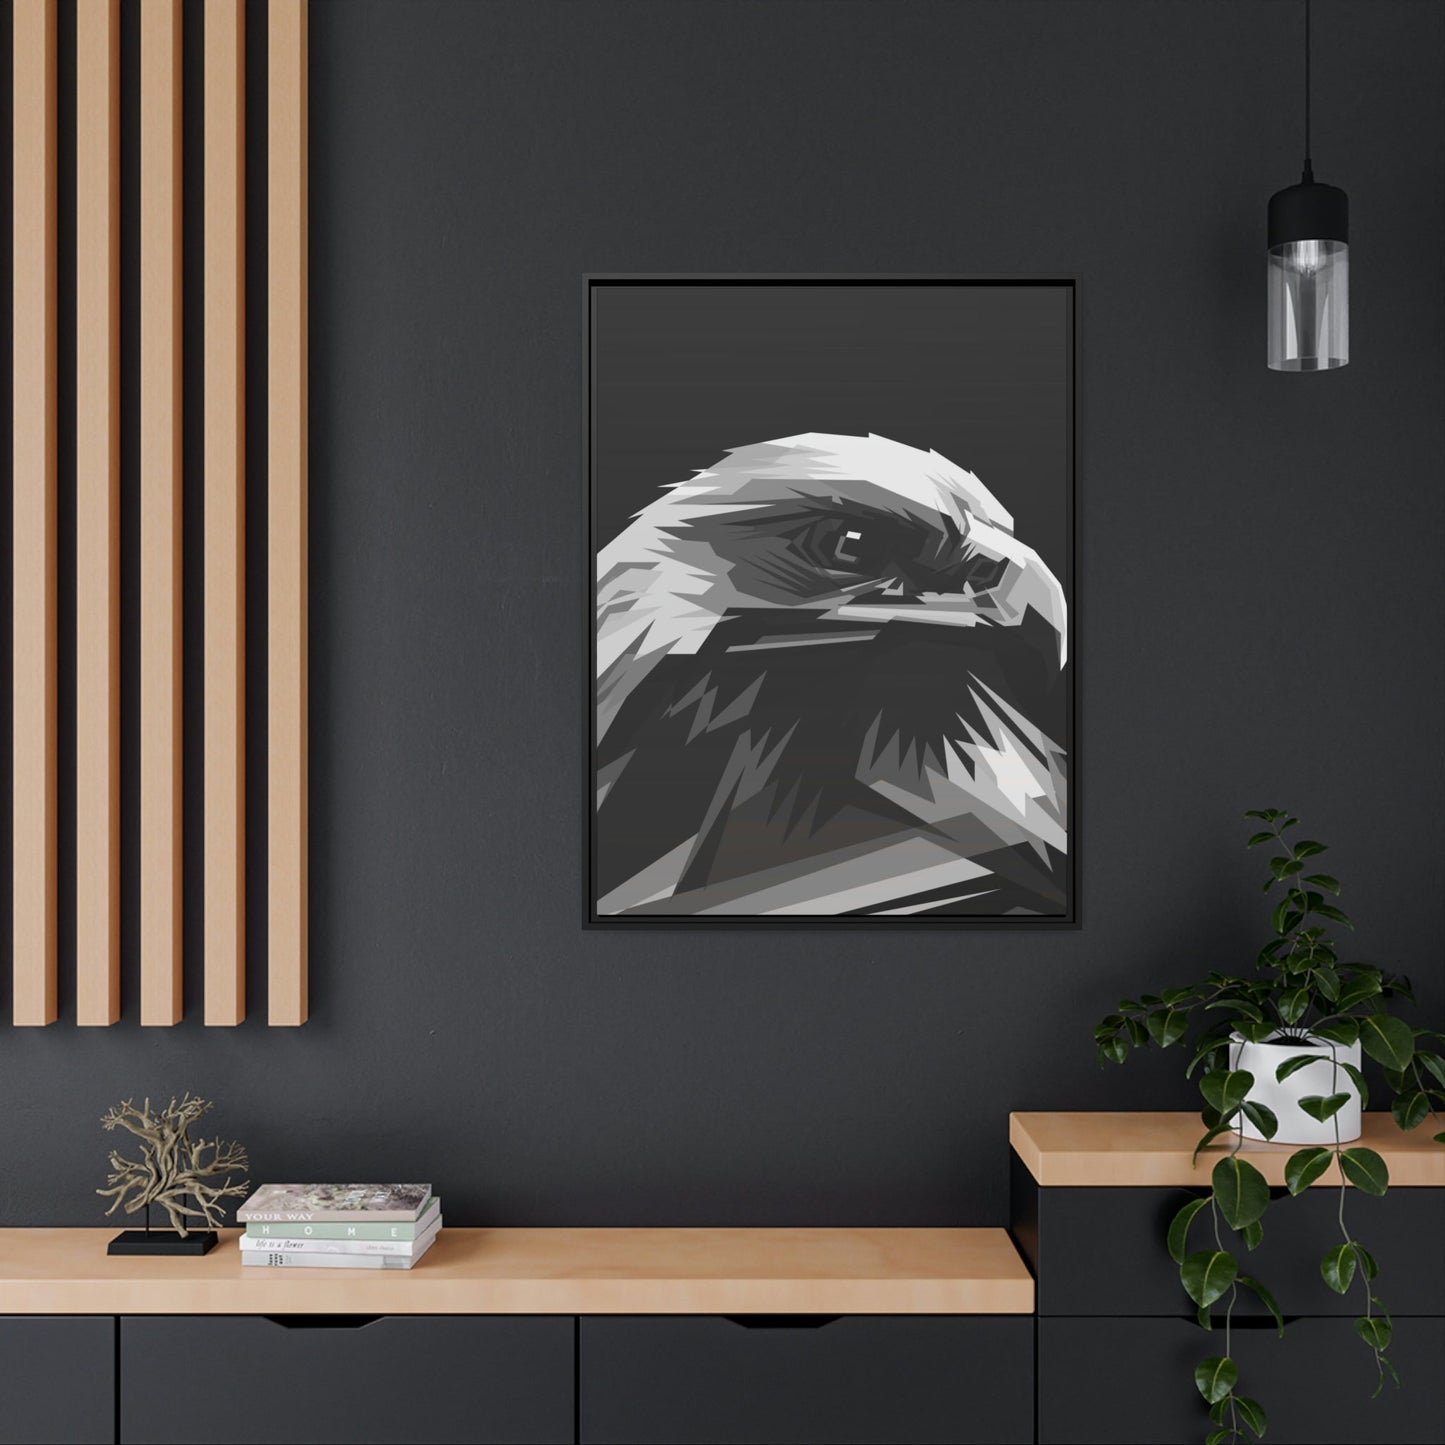 Mystical Guardians: Framed Poster Embodied with the Essence of Eagles